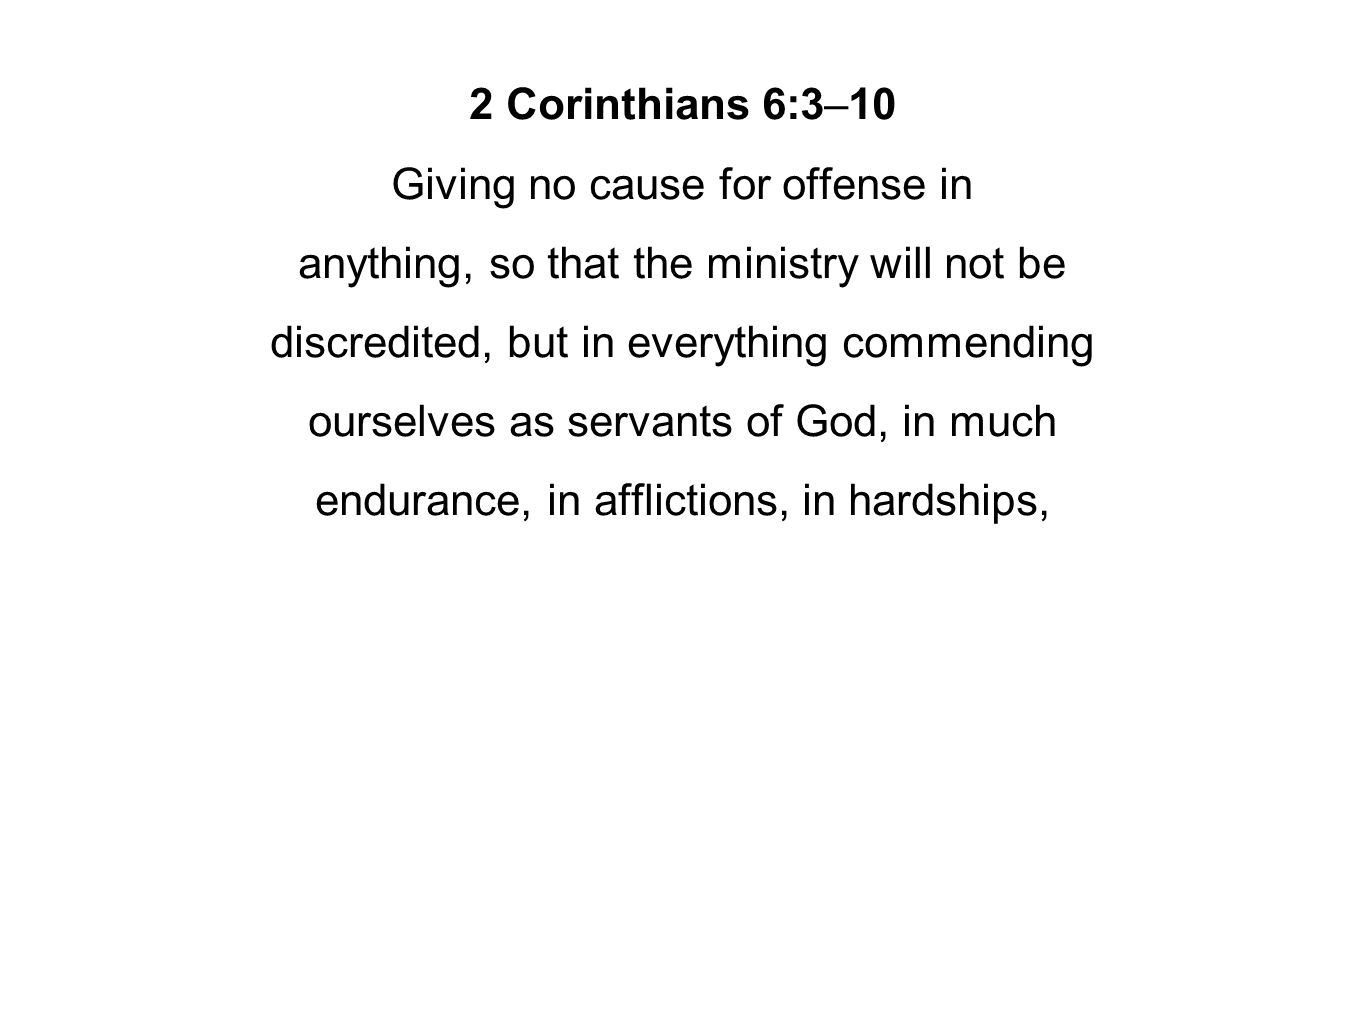 2 Corinthians 6:3–10 Giving no cause for offense in anything, so that the ministry will not be discredited, but in everything commending ourselves as servants of God, in much endurance, in afflictions, in hardships,